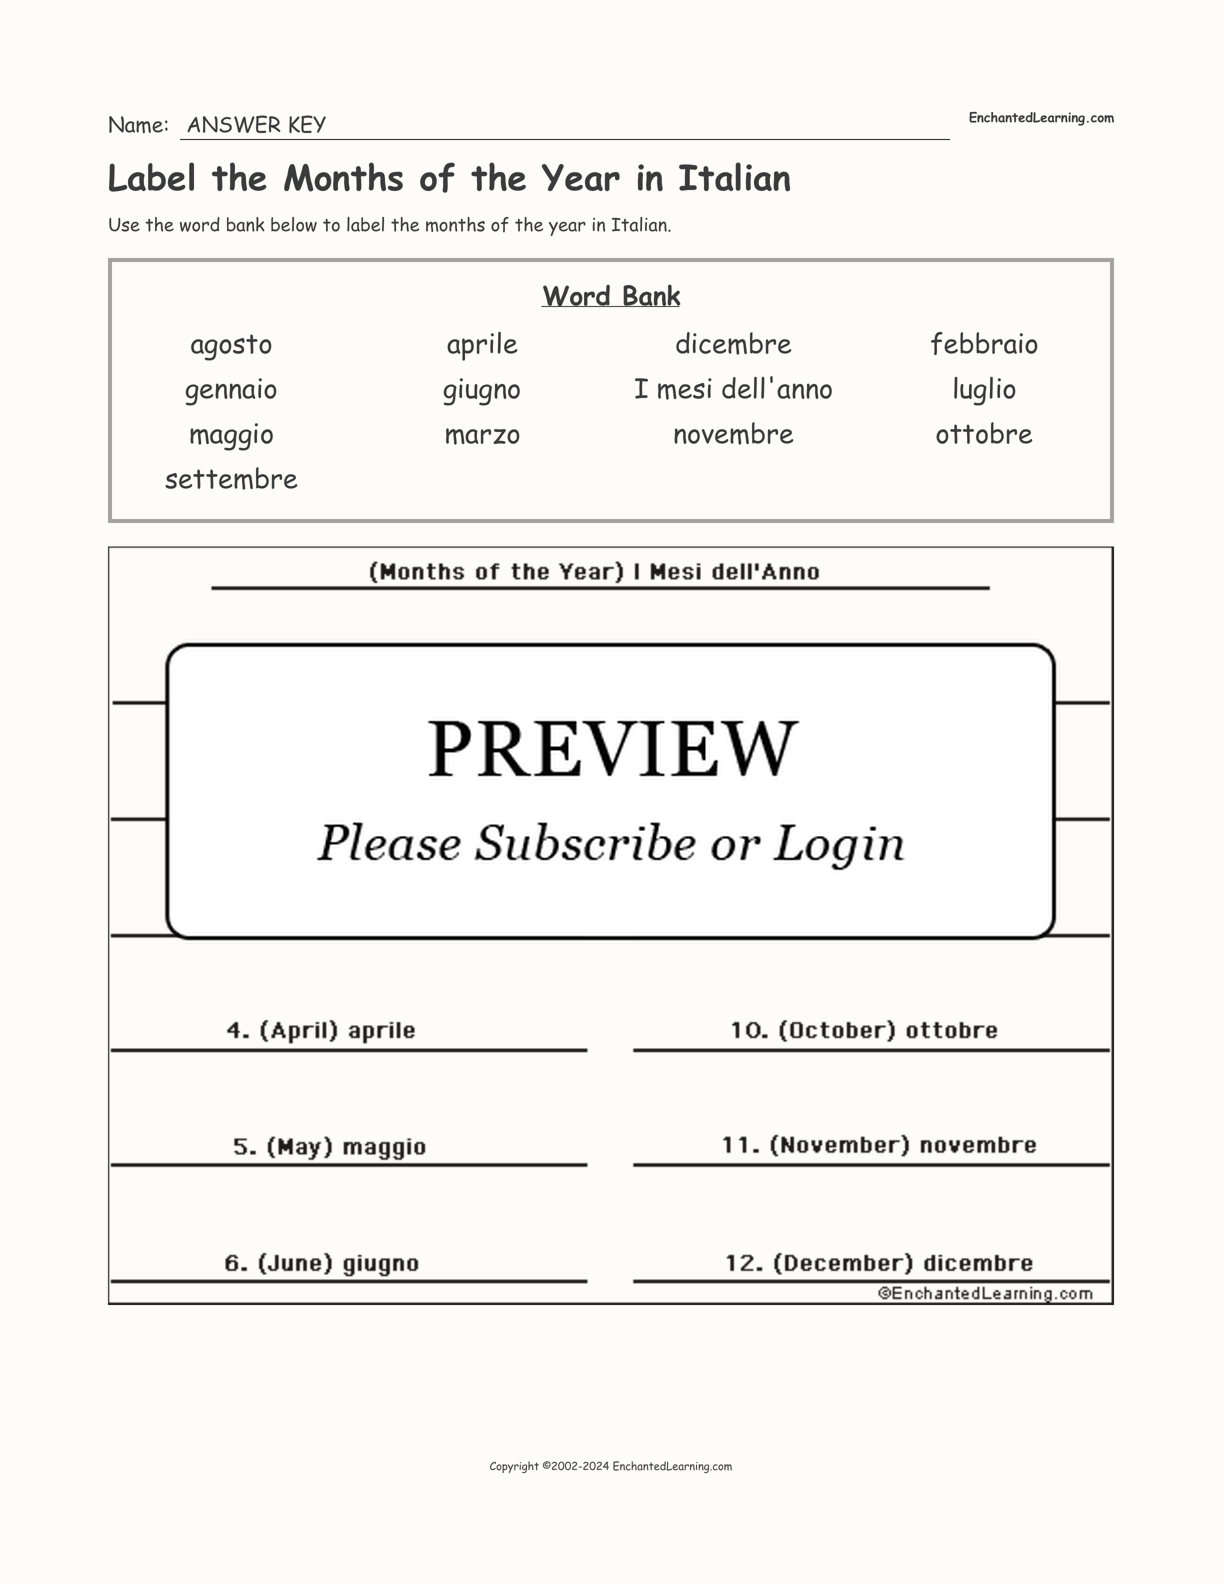 Label the Months of the Year in Italian interactive worksheet page 2